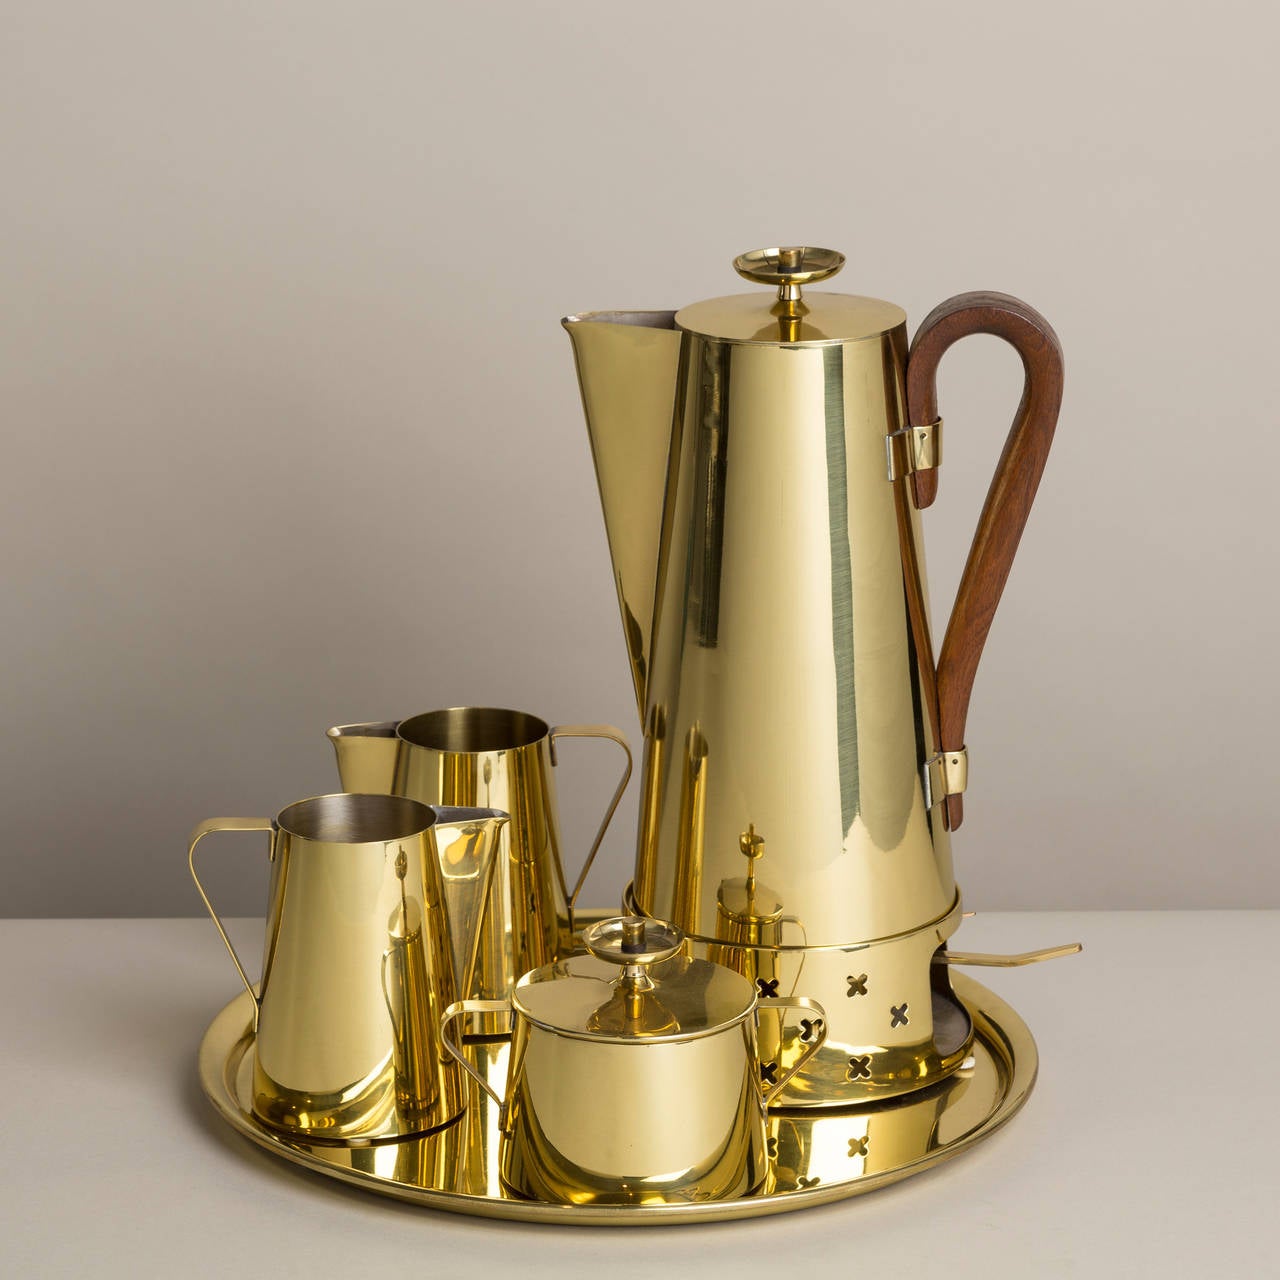 A Superb Original Five Piece Coffee Set designed by Parzinger for Dorlyn 1950s stamped